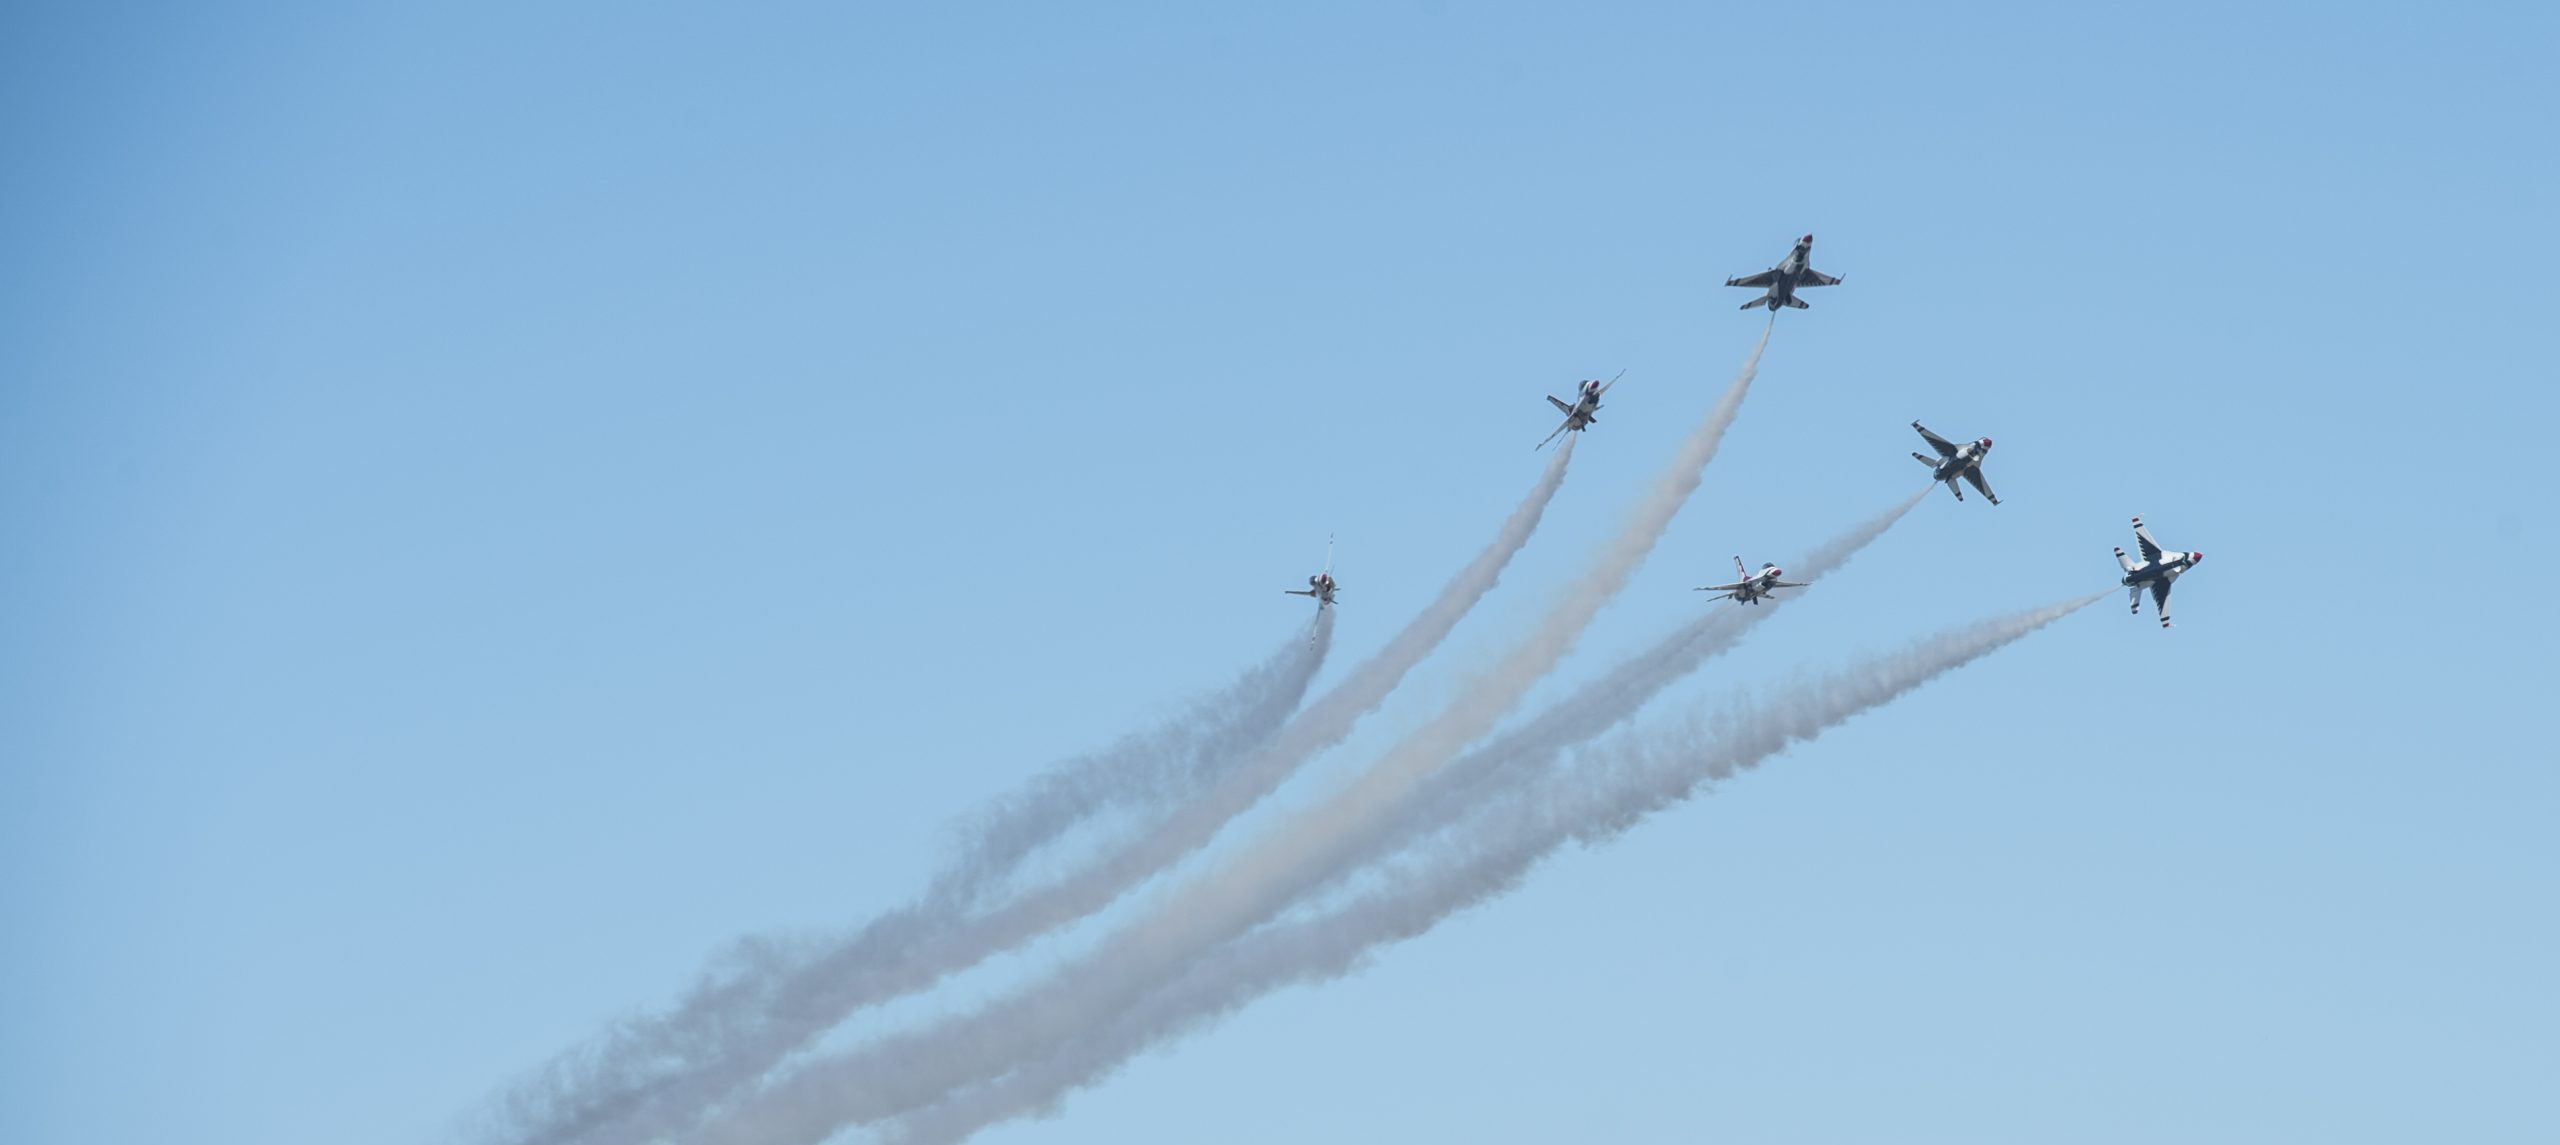 Six jet planes flying through the air with smoke trailing behind them